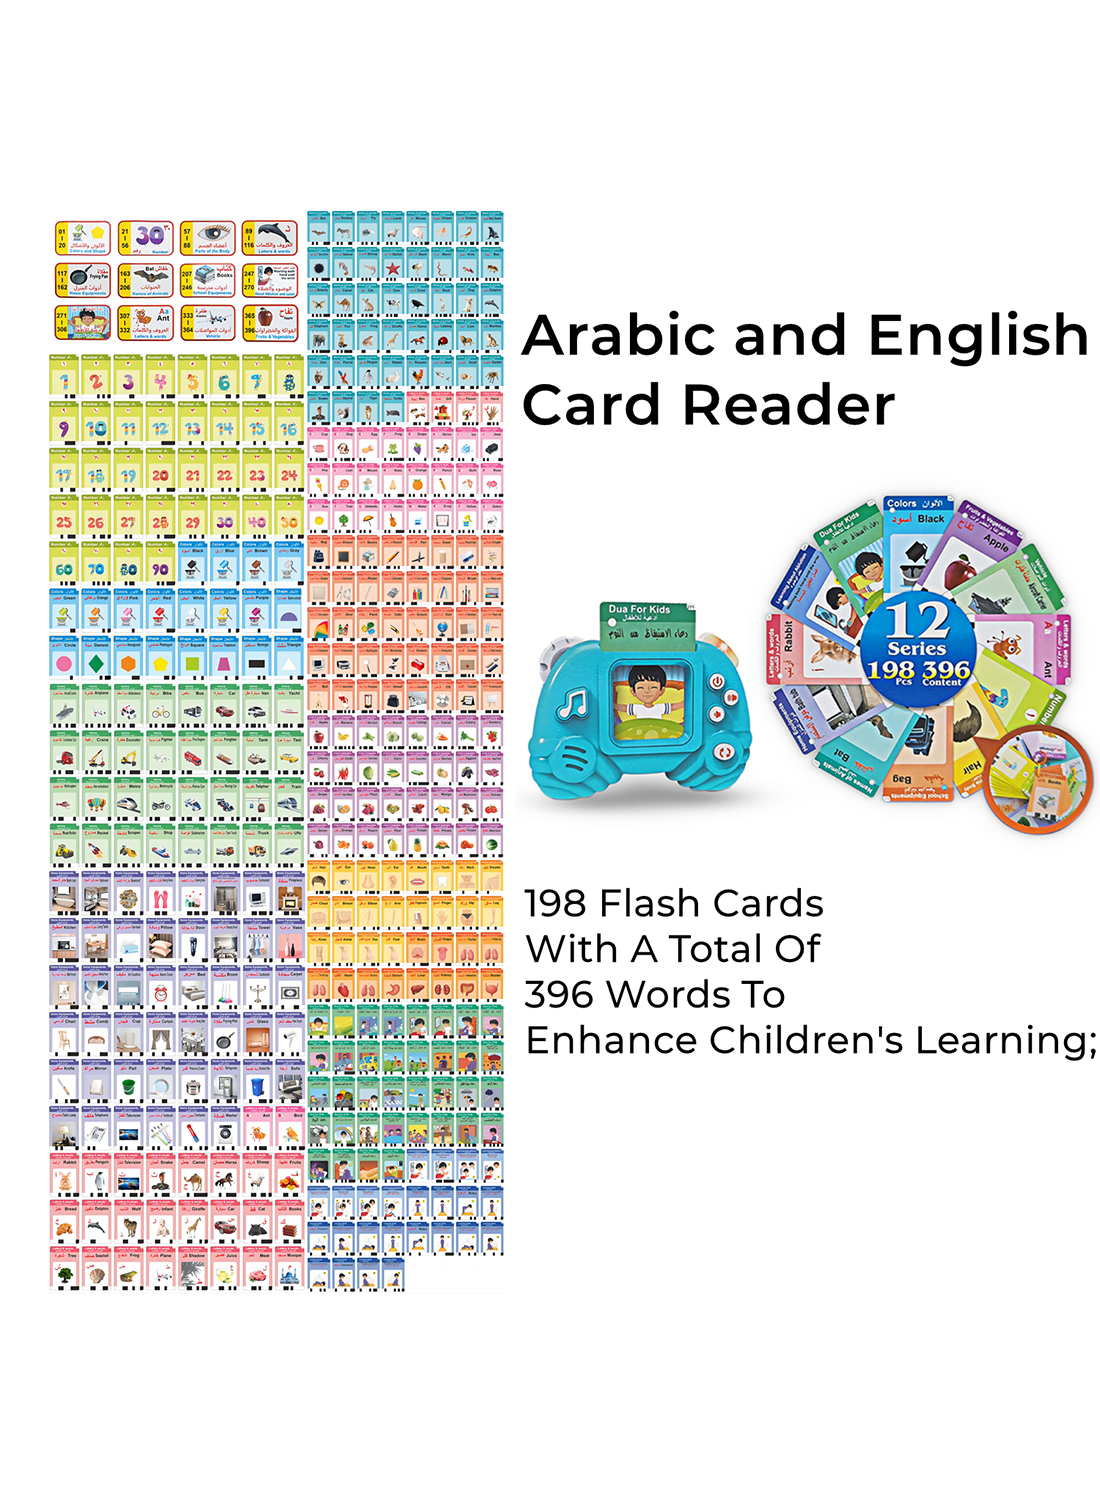 Arabic Alphabet Talking Flash Cards for Kids, Learning Arabic Letters, 396 Basic Sight Words, Arabic Learning Toys Learning Machine Early Education Machine for Toddlers